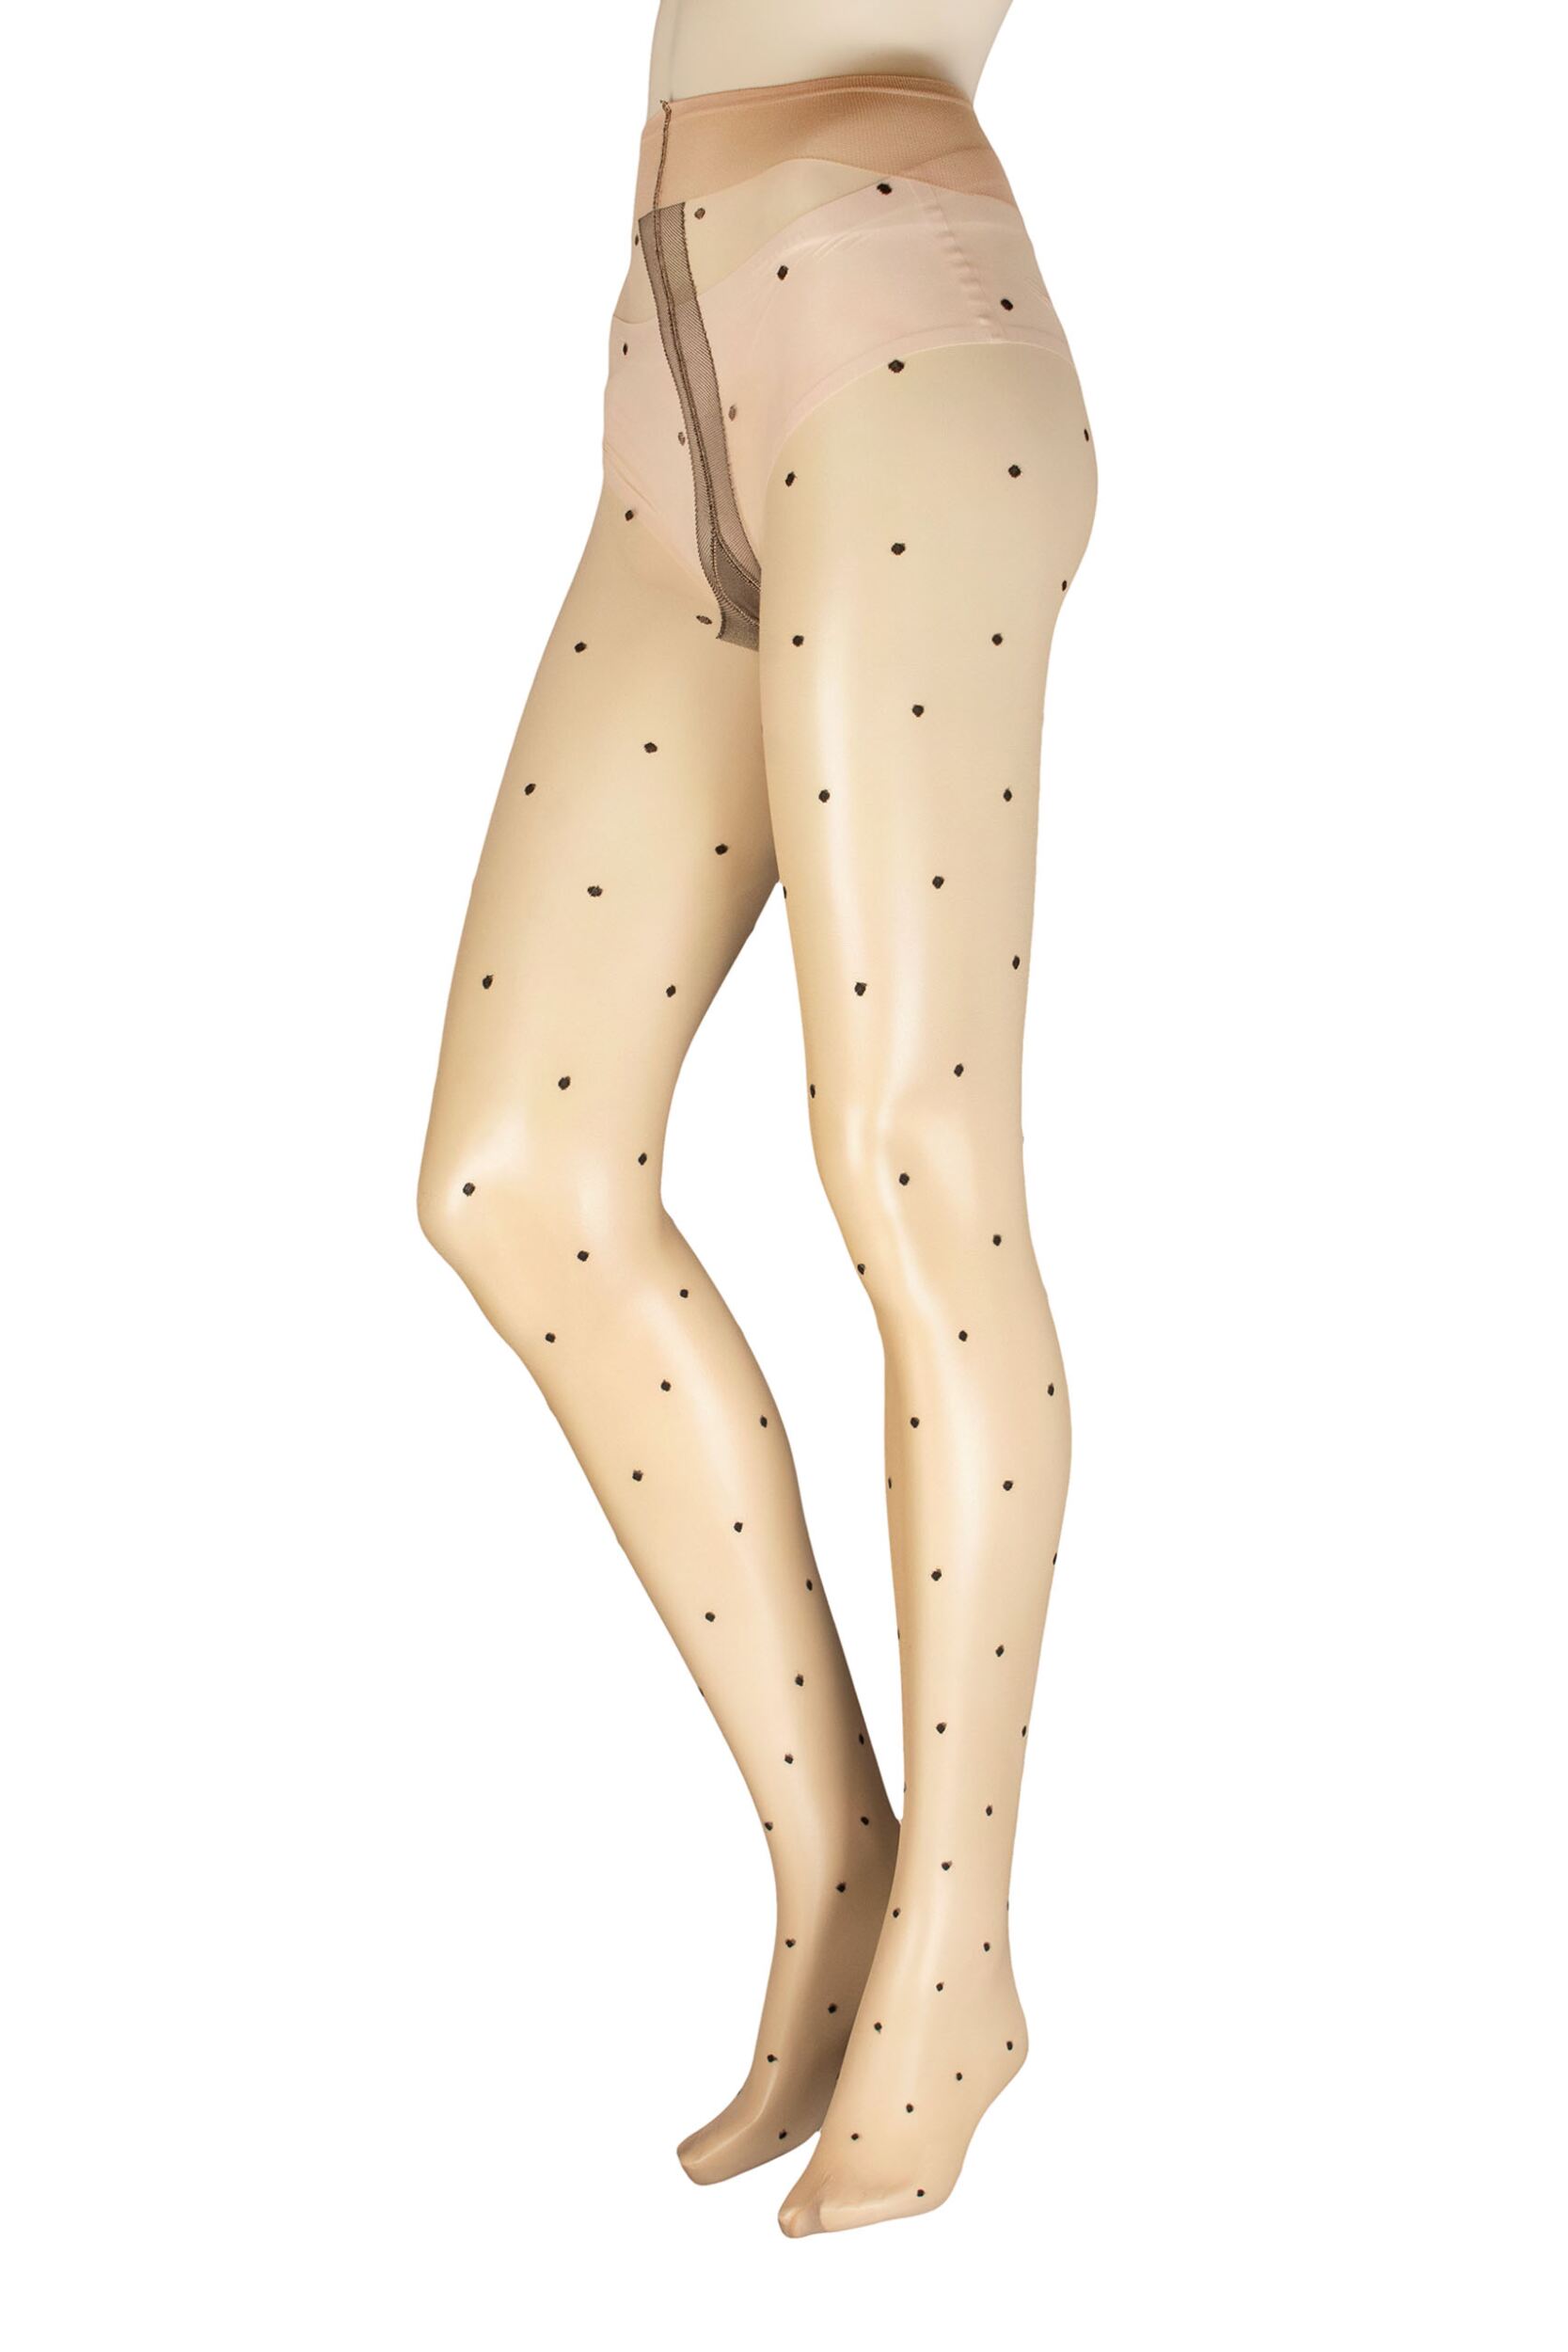 Ladies 1 Pair Trasparenze Anguria Spotted Tights Cosmetic Large